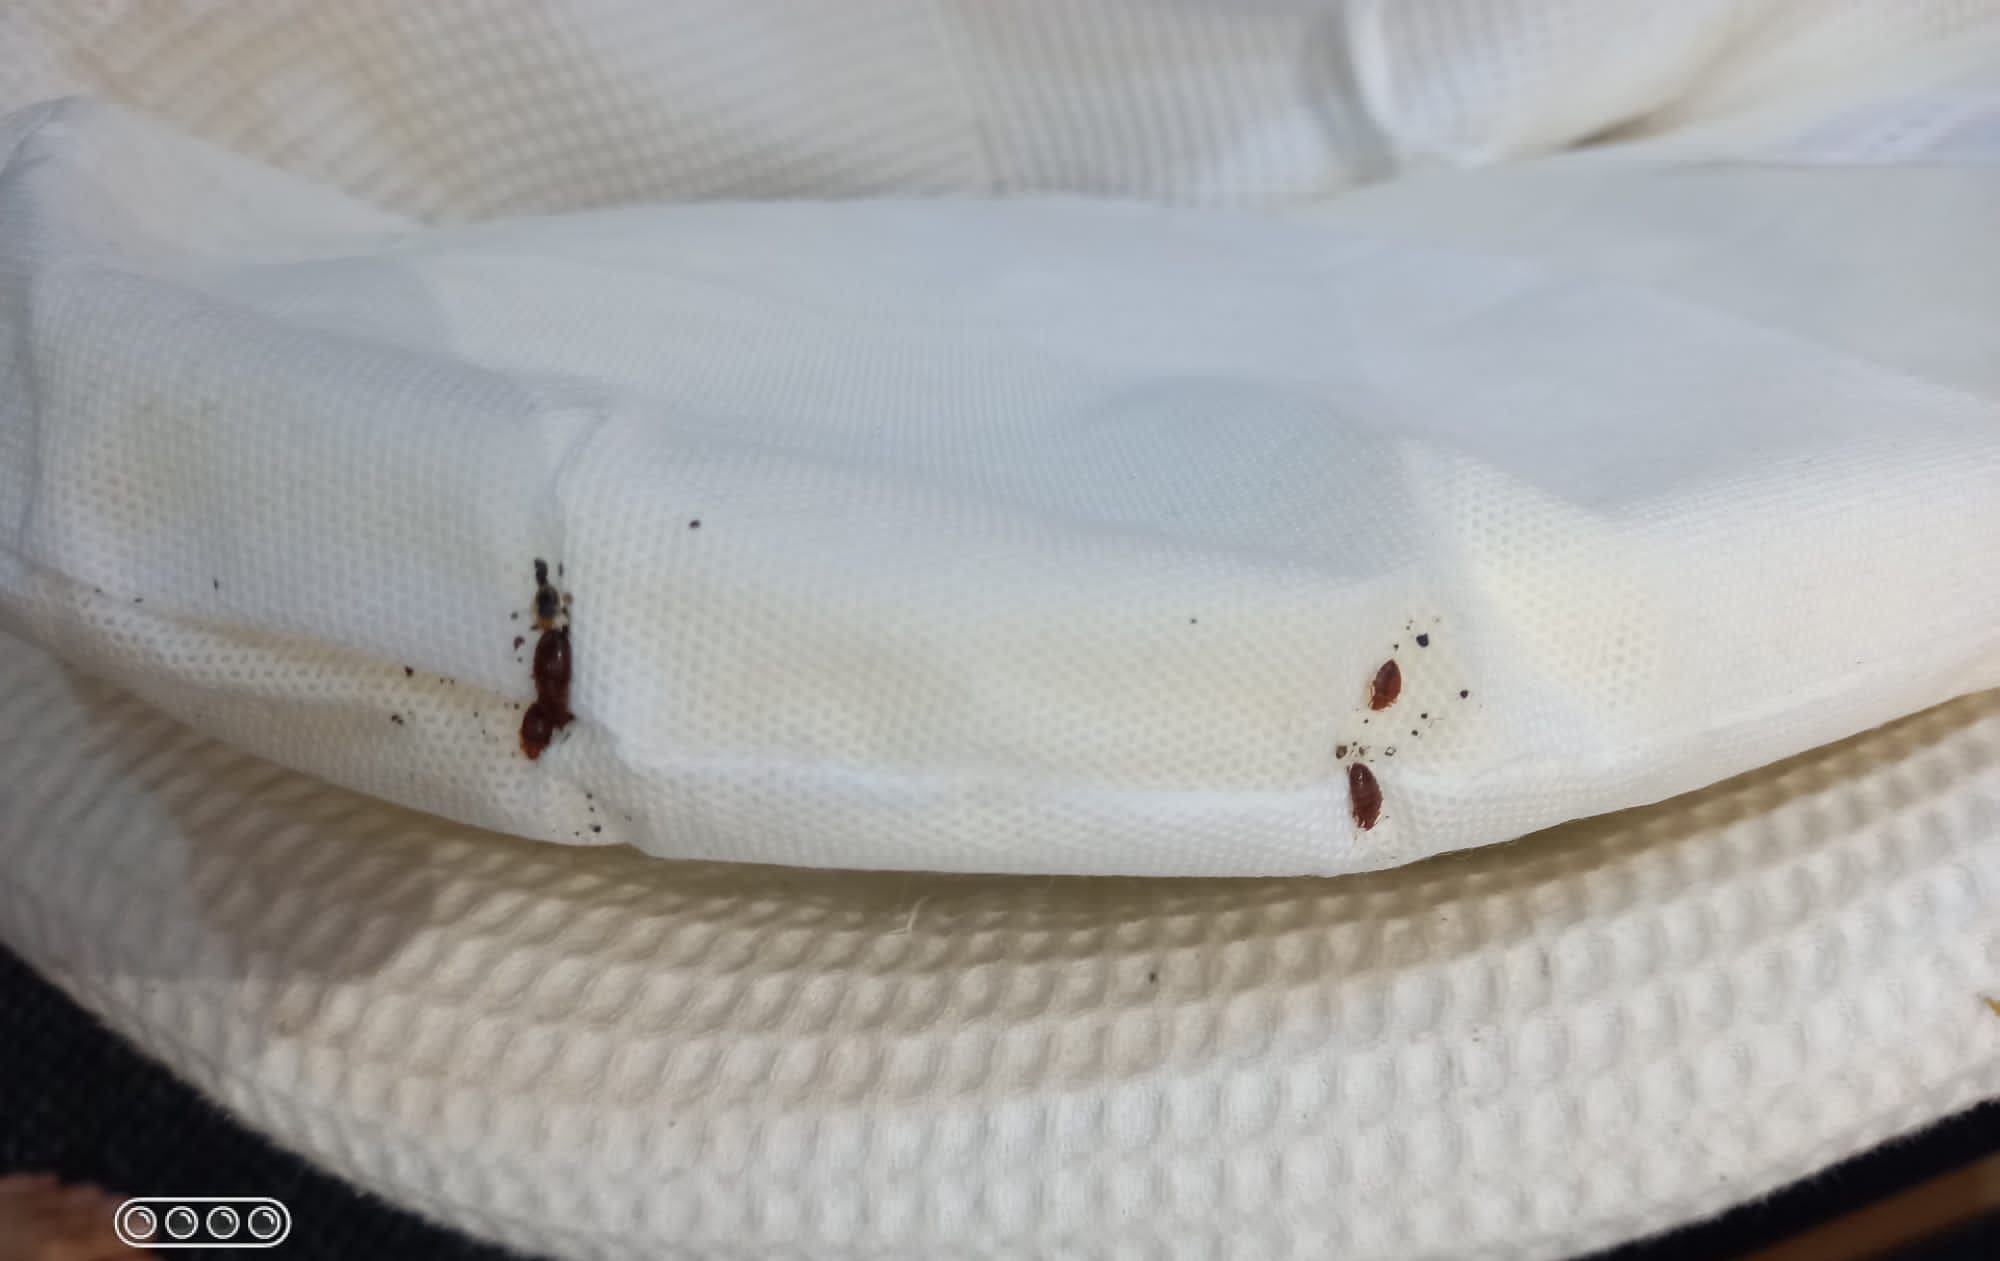 Dead insects in a child's cot 